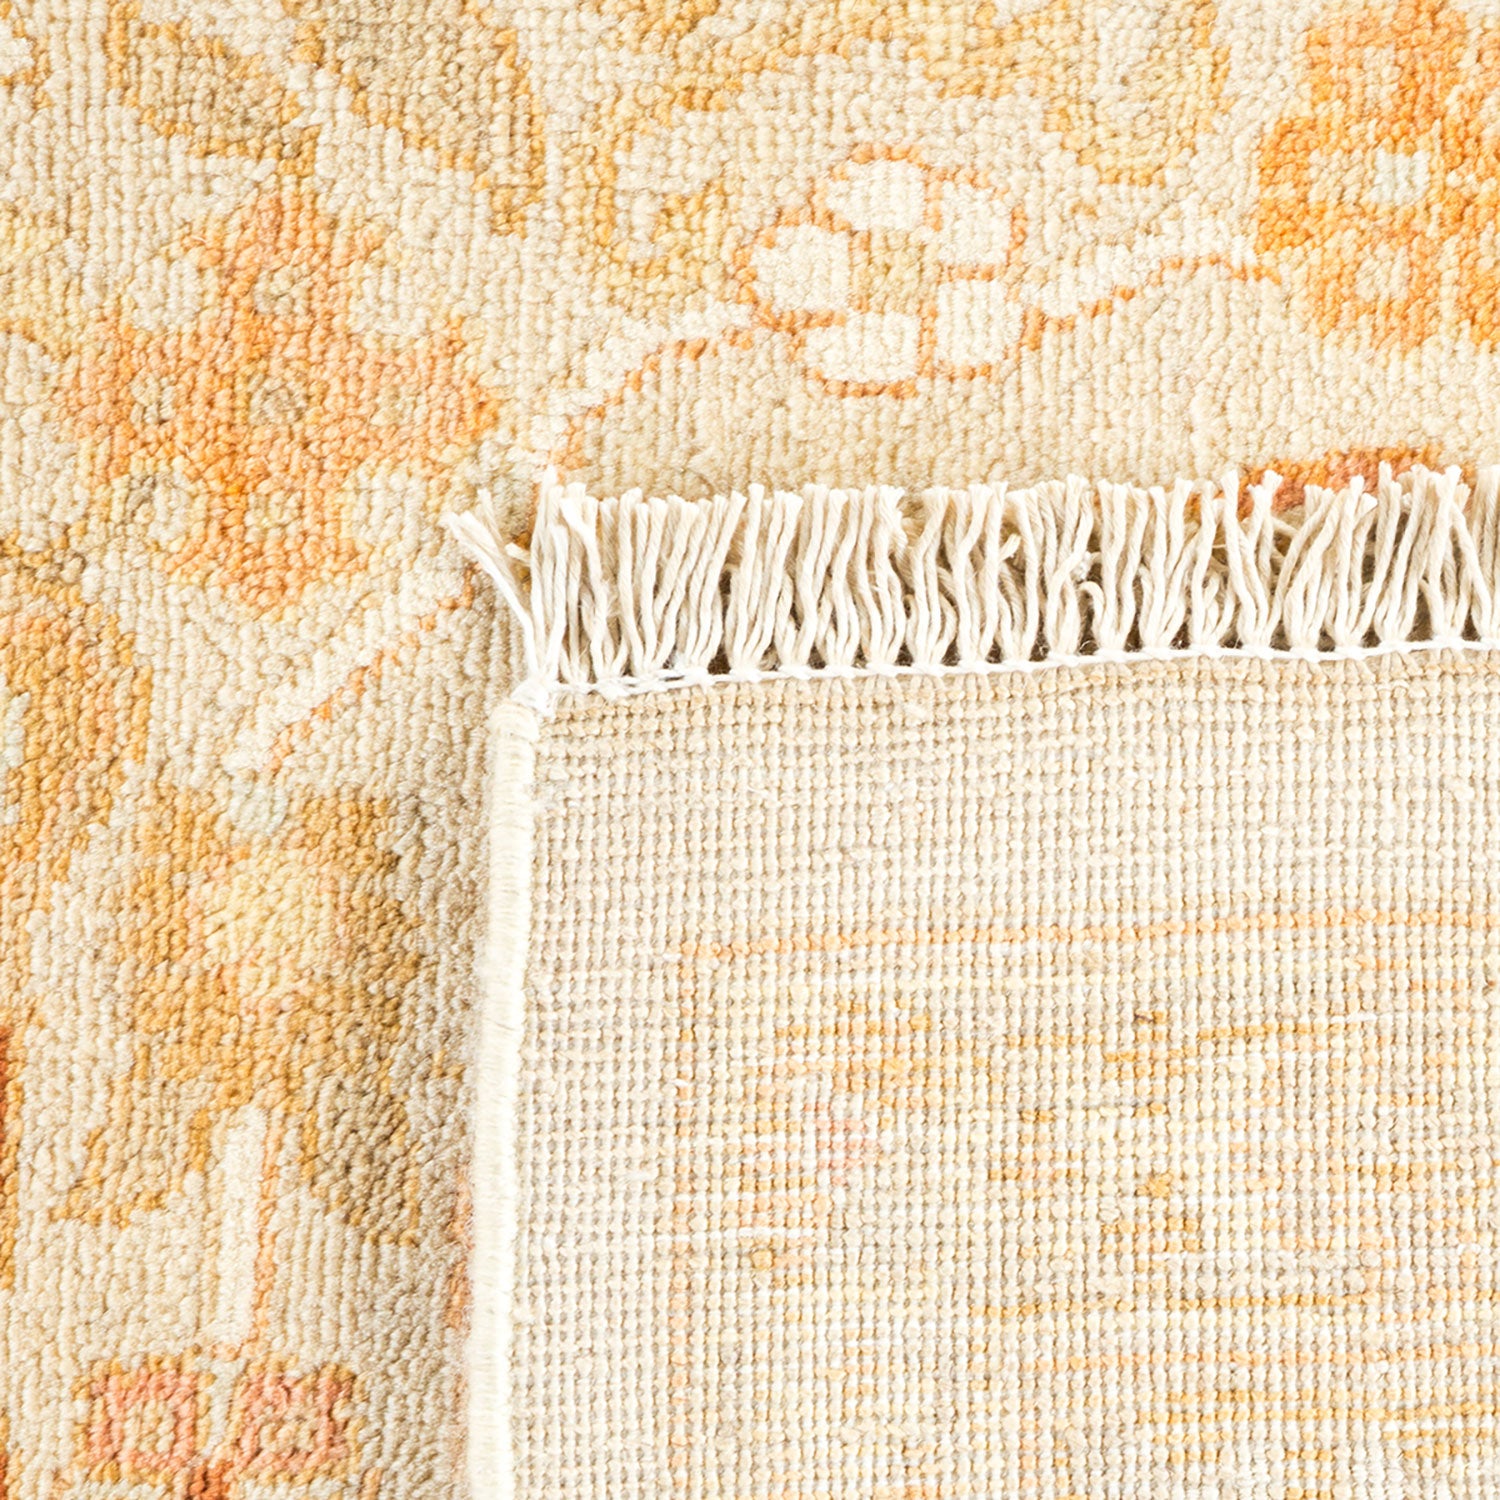 Close-up of a textile rug with cream and orange patterns